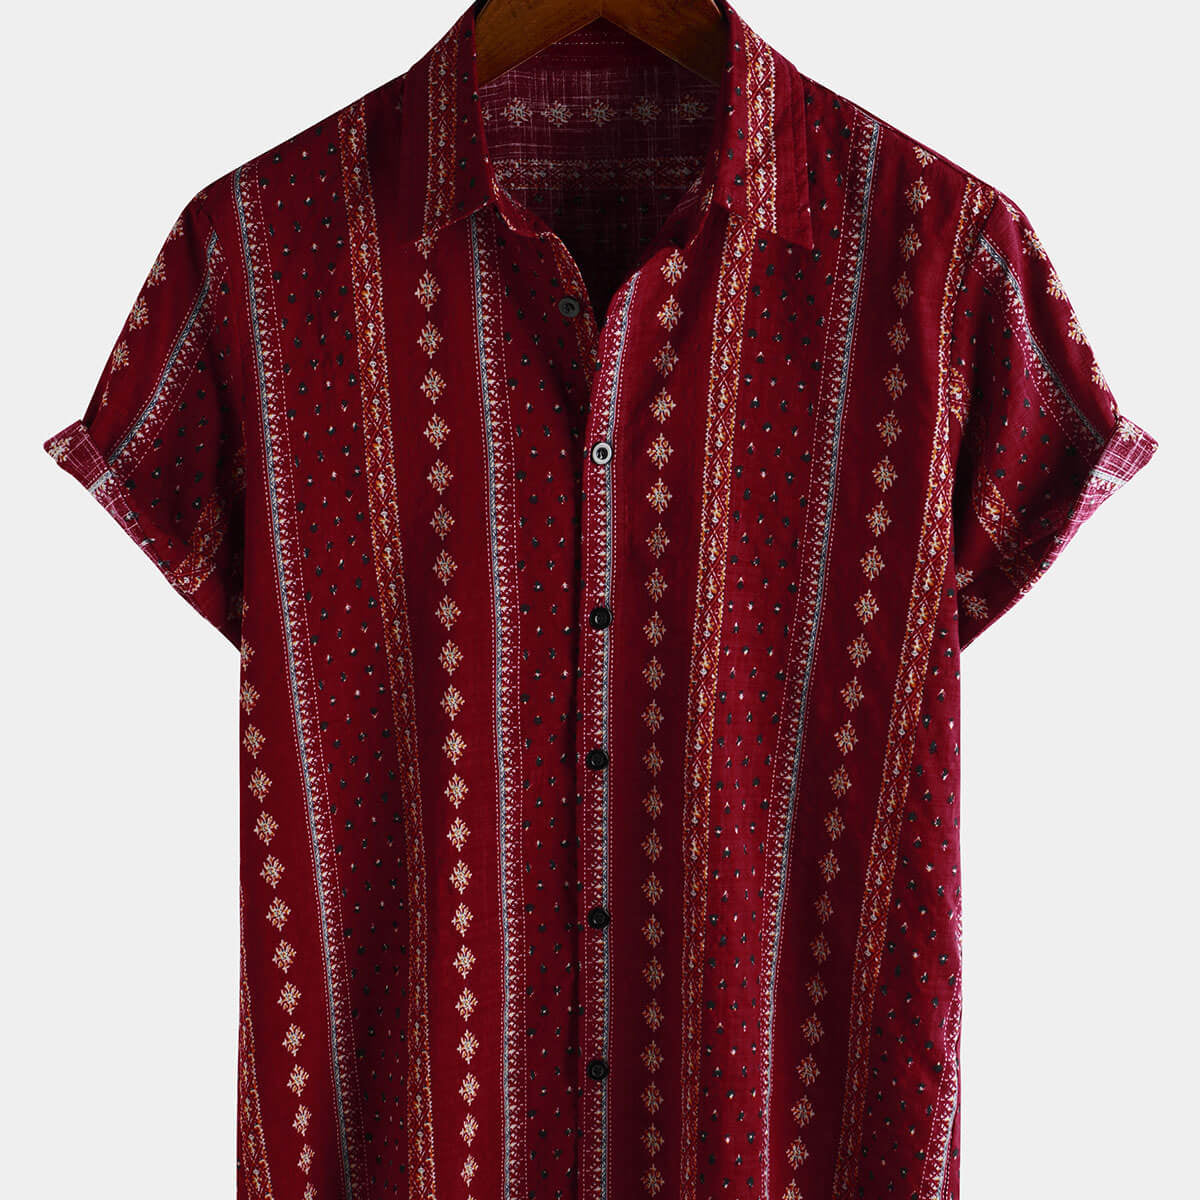 Men's Retro Red Striped Print Button Up 70s Vintage Short Sleeve Shirt